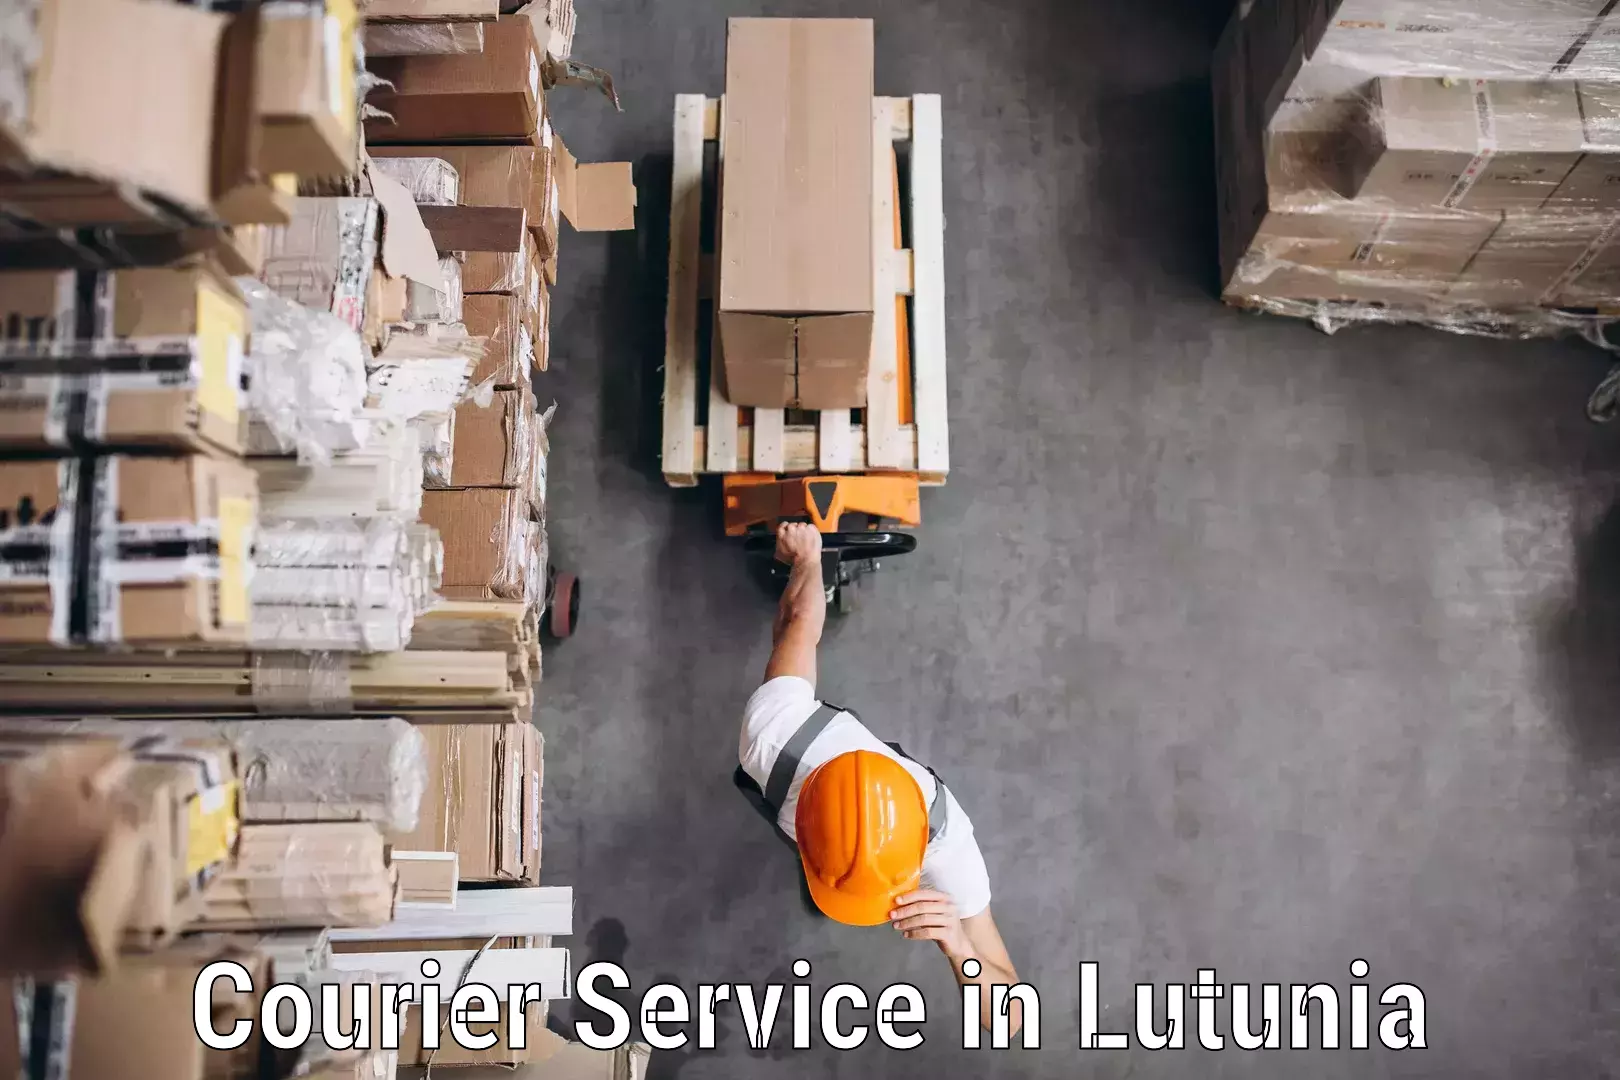 Express postal services in Lutunia